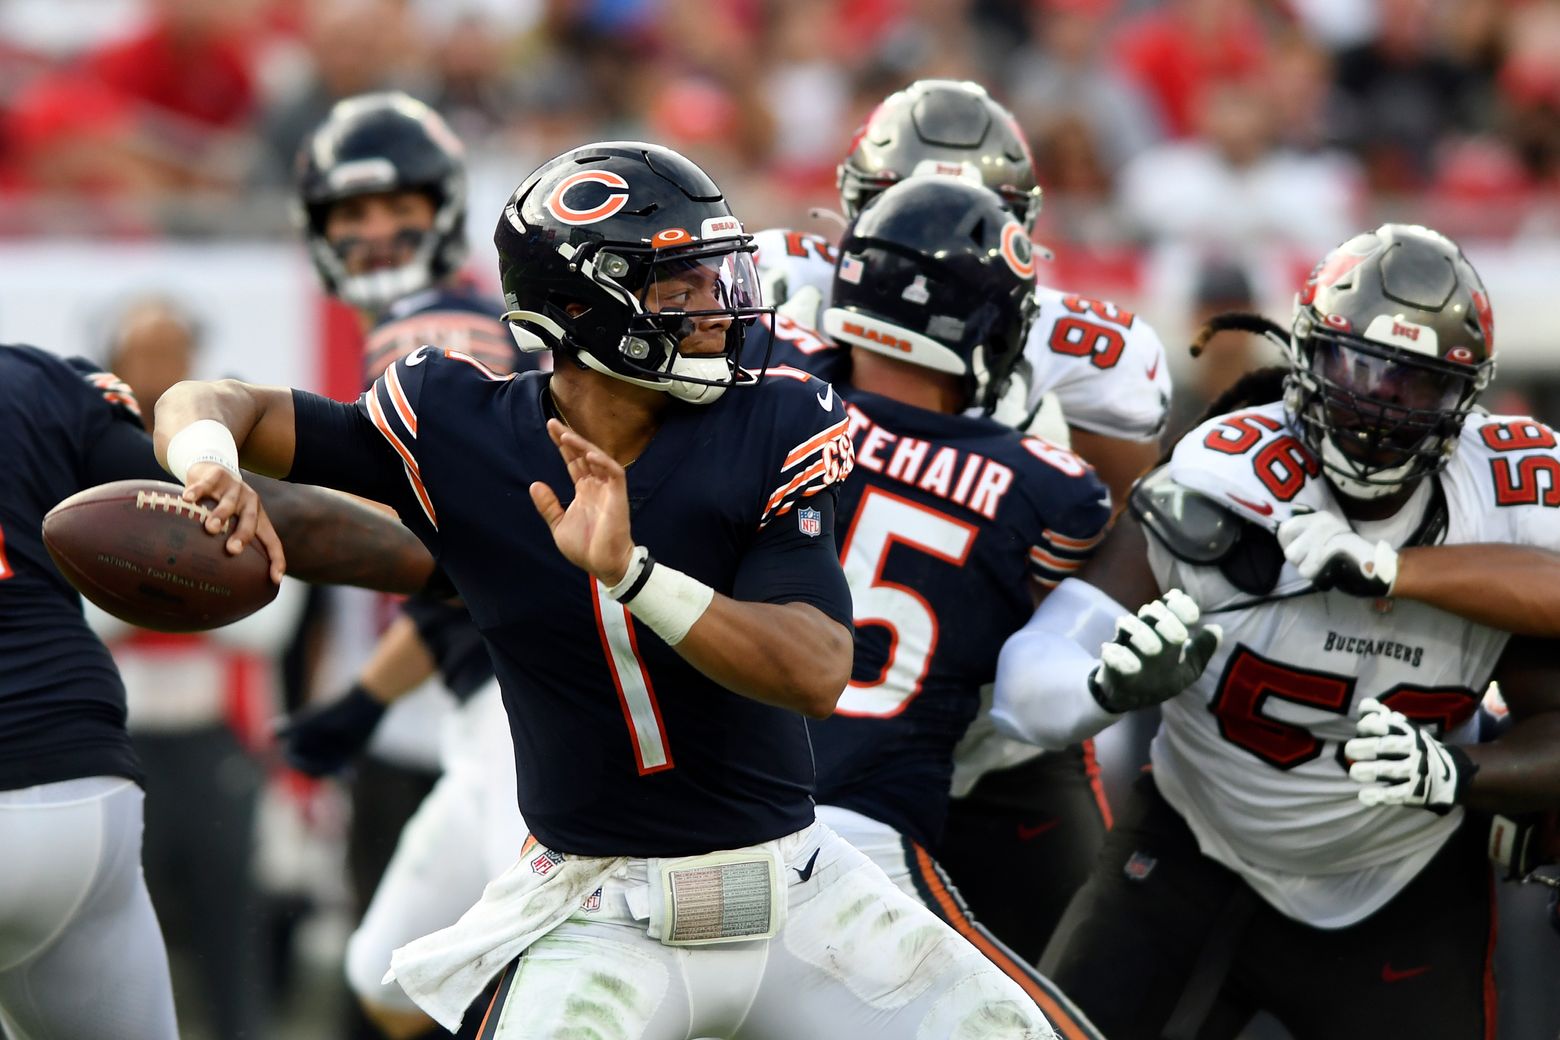 Bears, 49ers looking to stop skids, get back to winning